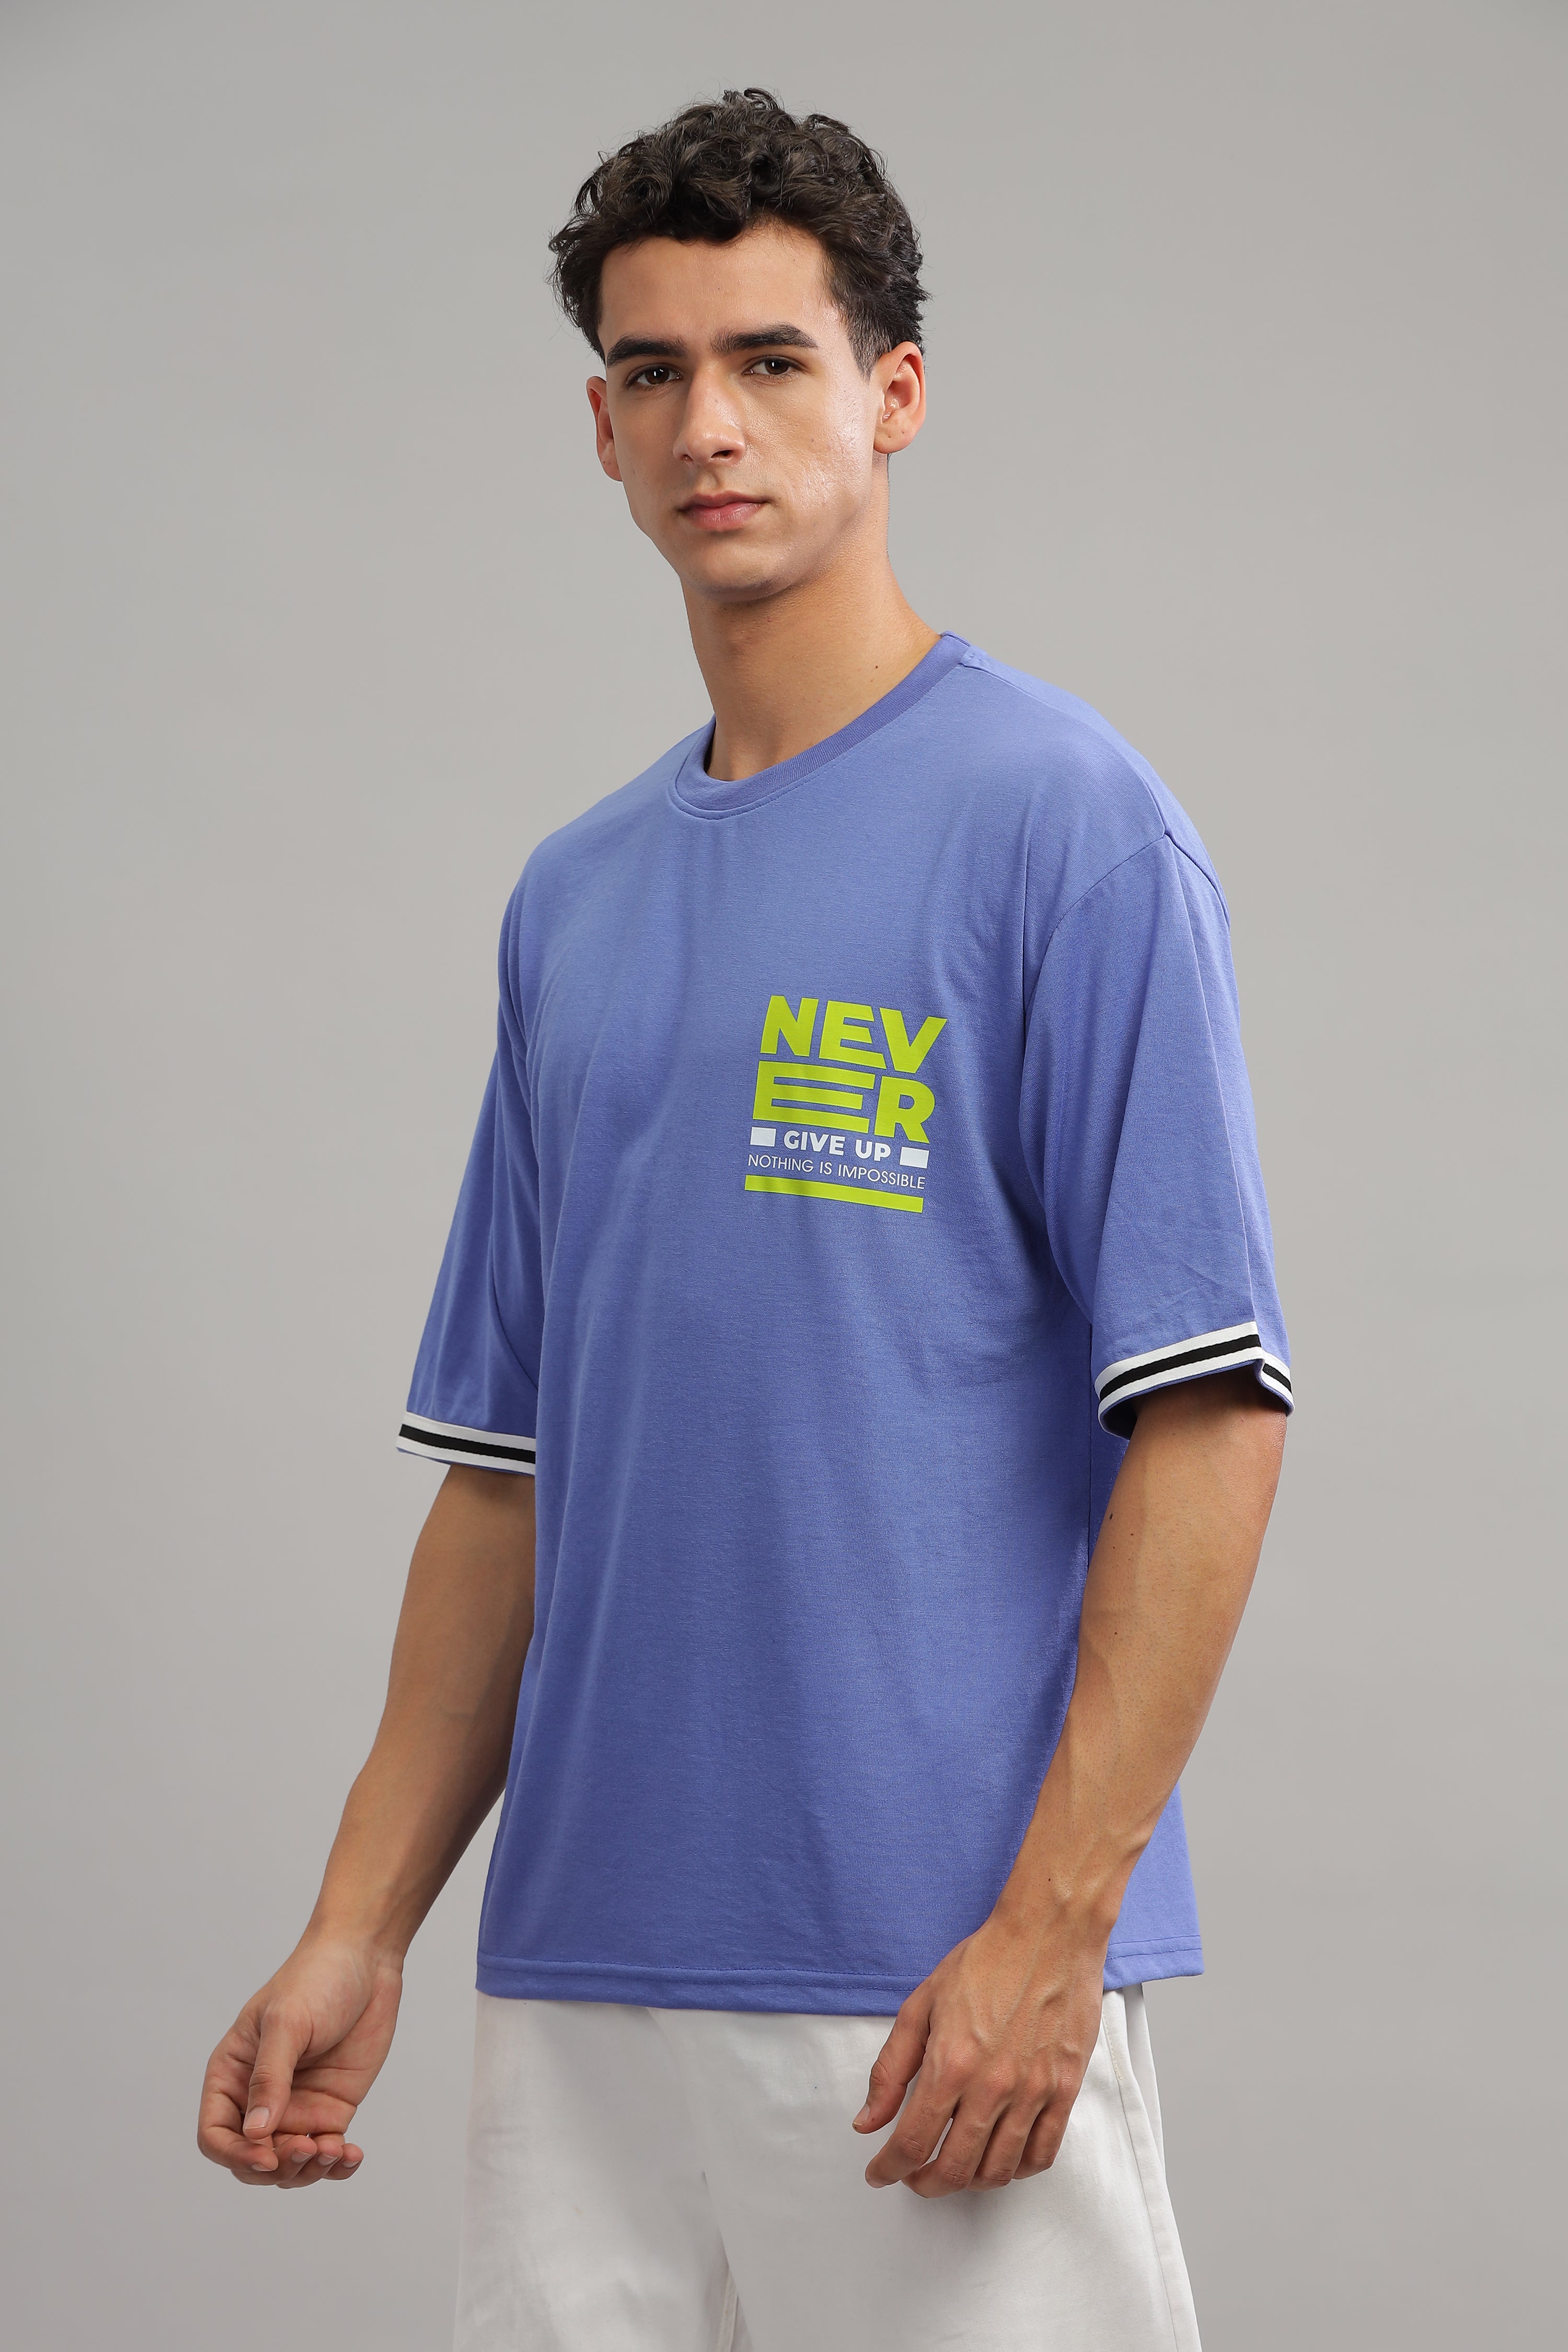 Blue Oversized "Never Give up" T-Shirt